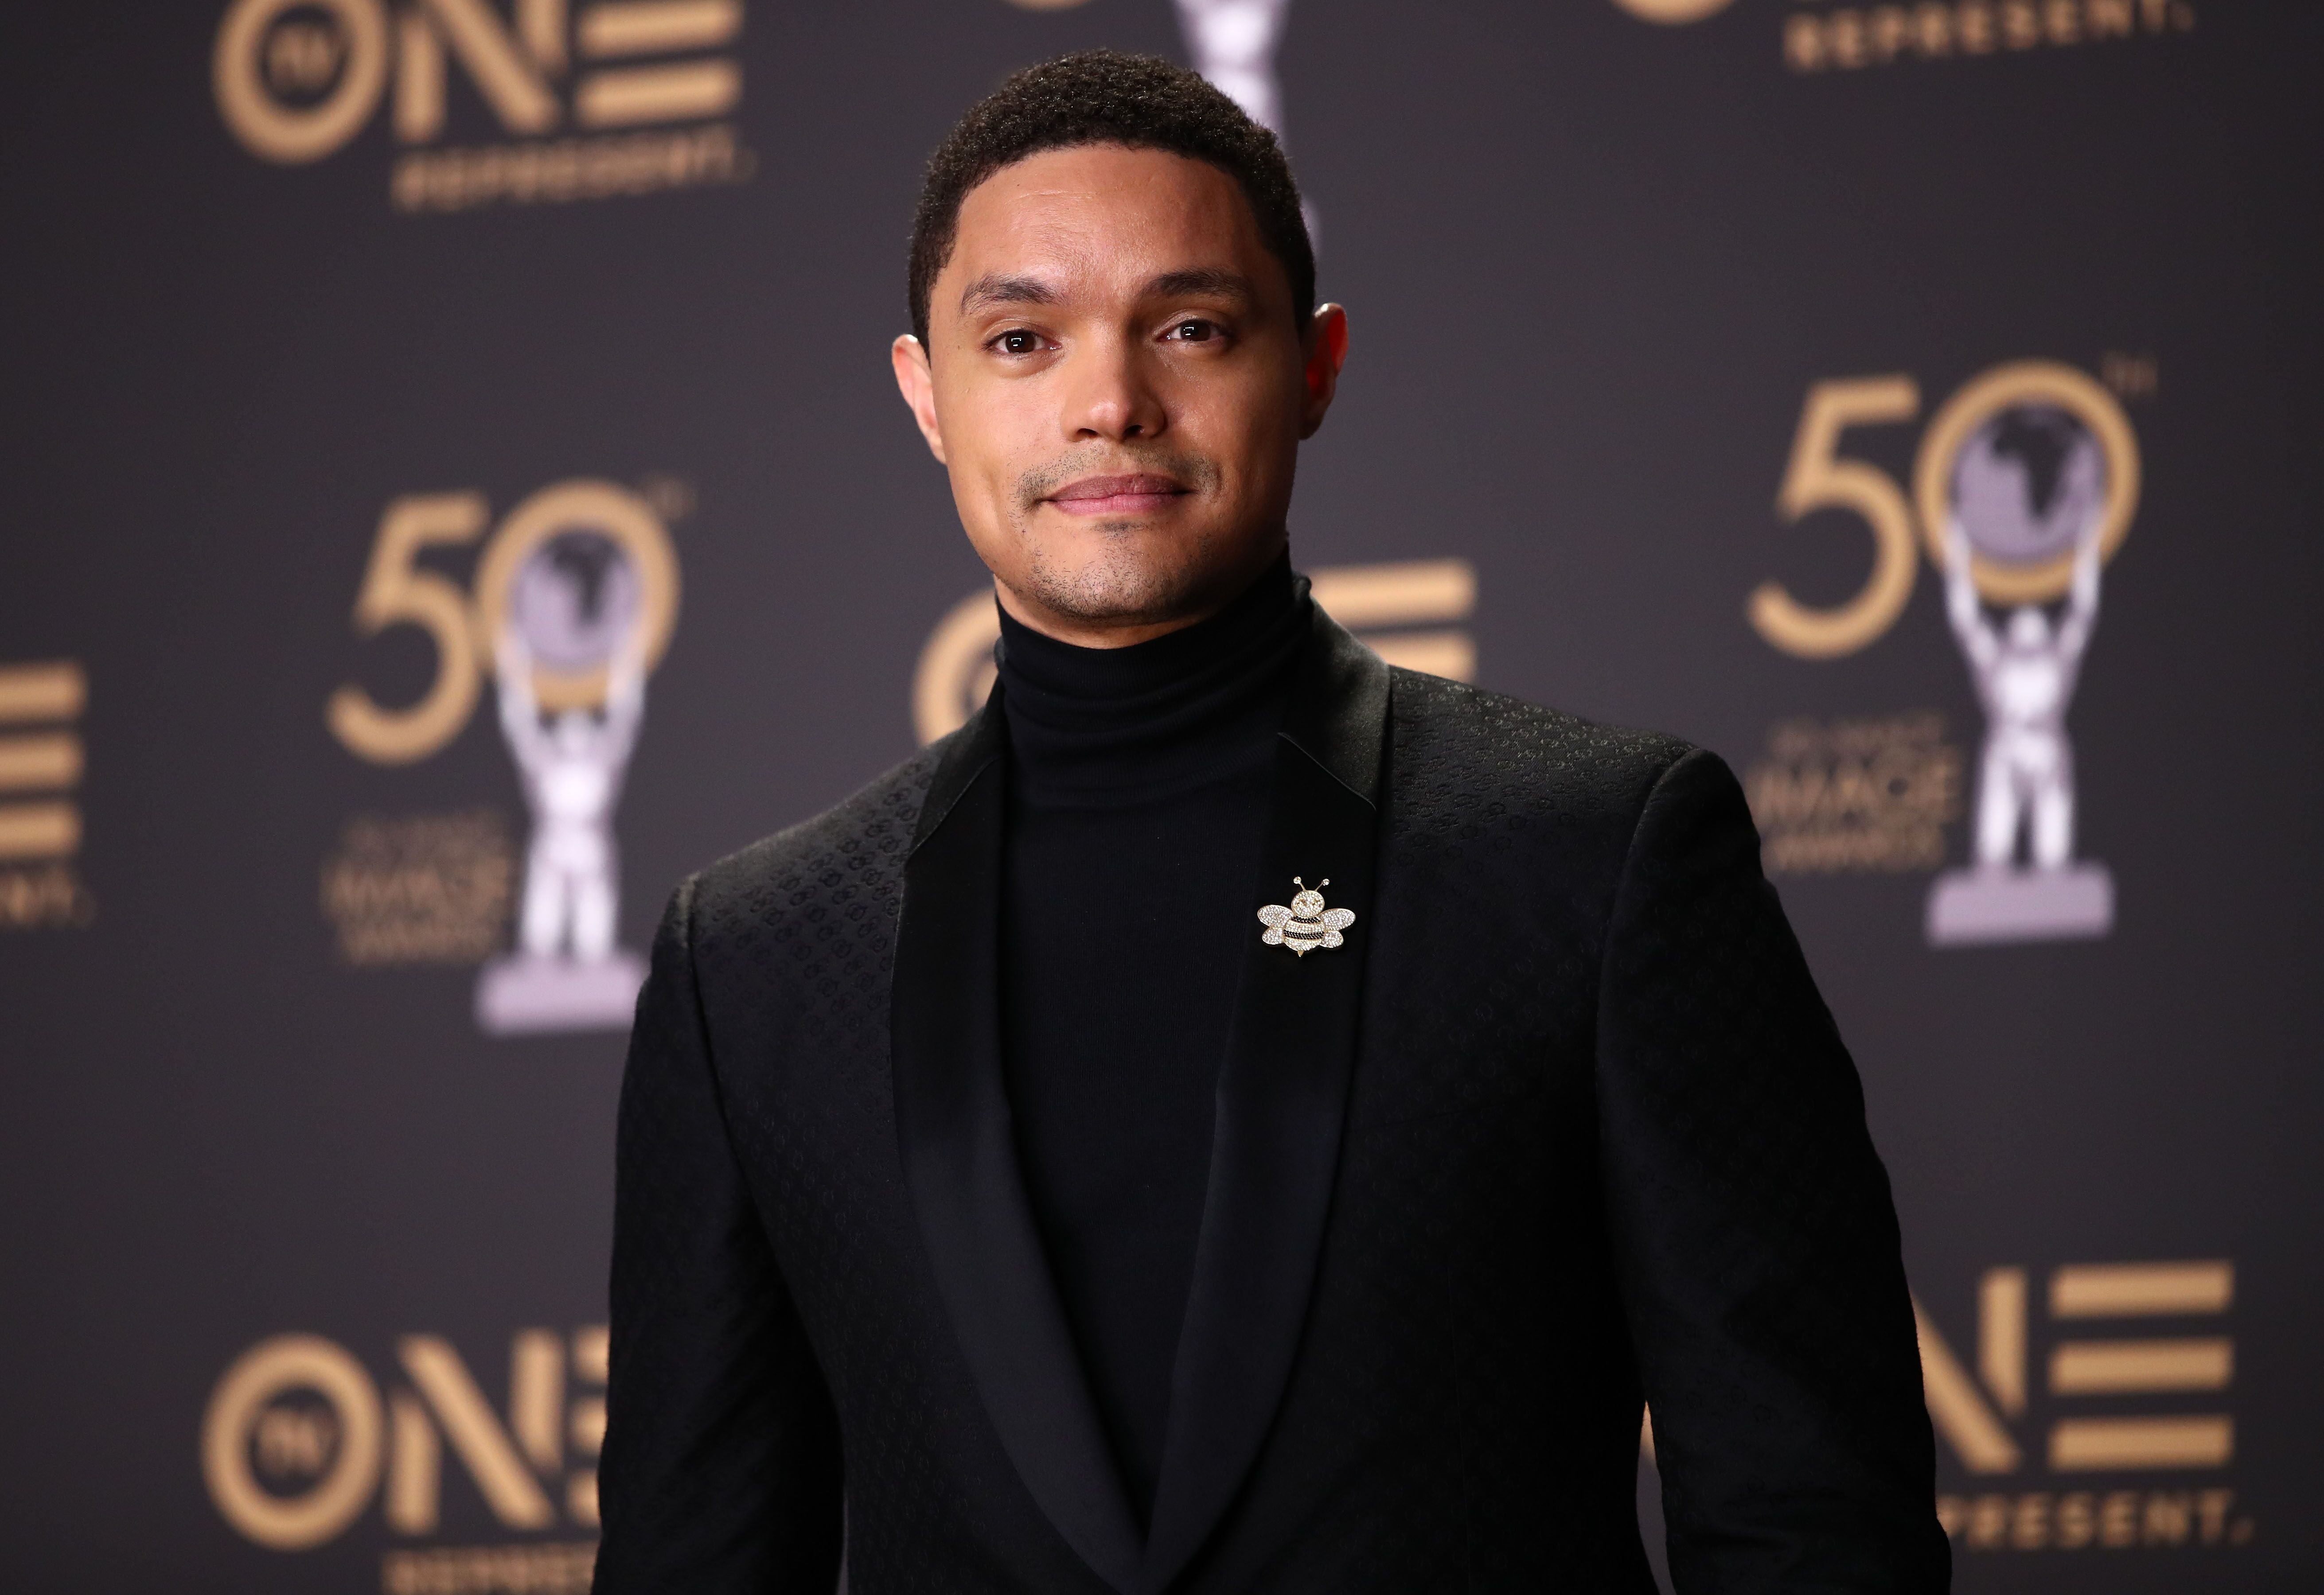 Trevor Noah attends the 50th NAACP Image Awards at Dolby Theatre on March 30, 2019 in Hollywood, California. | Source: Getty Images